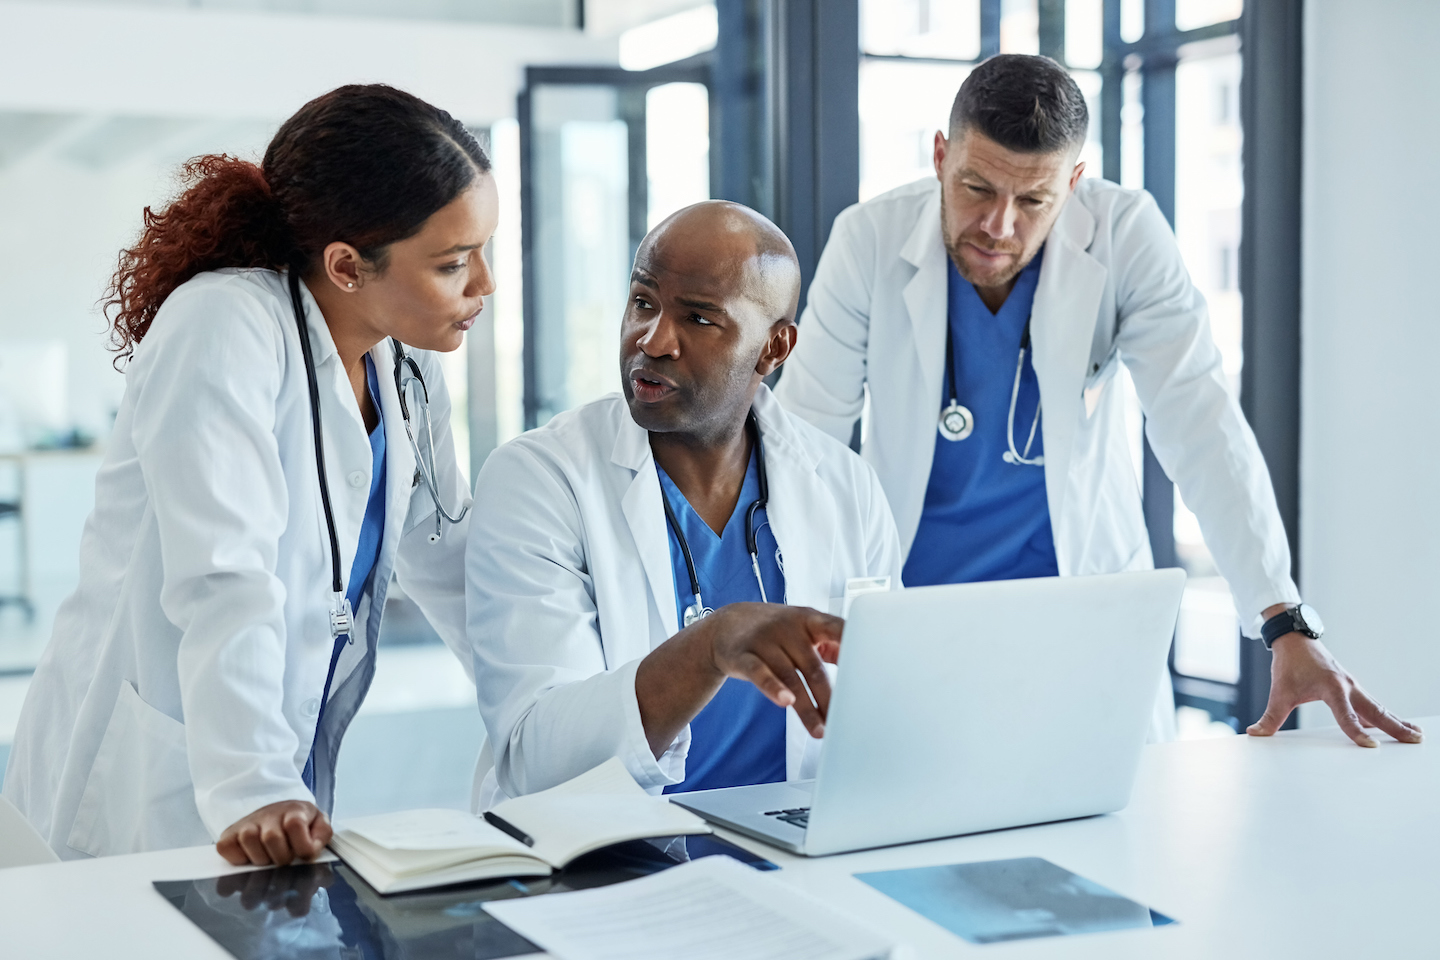 Diverse group of medical professionals discussing while looking at a laptop.